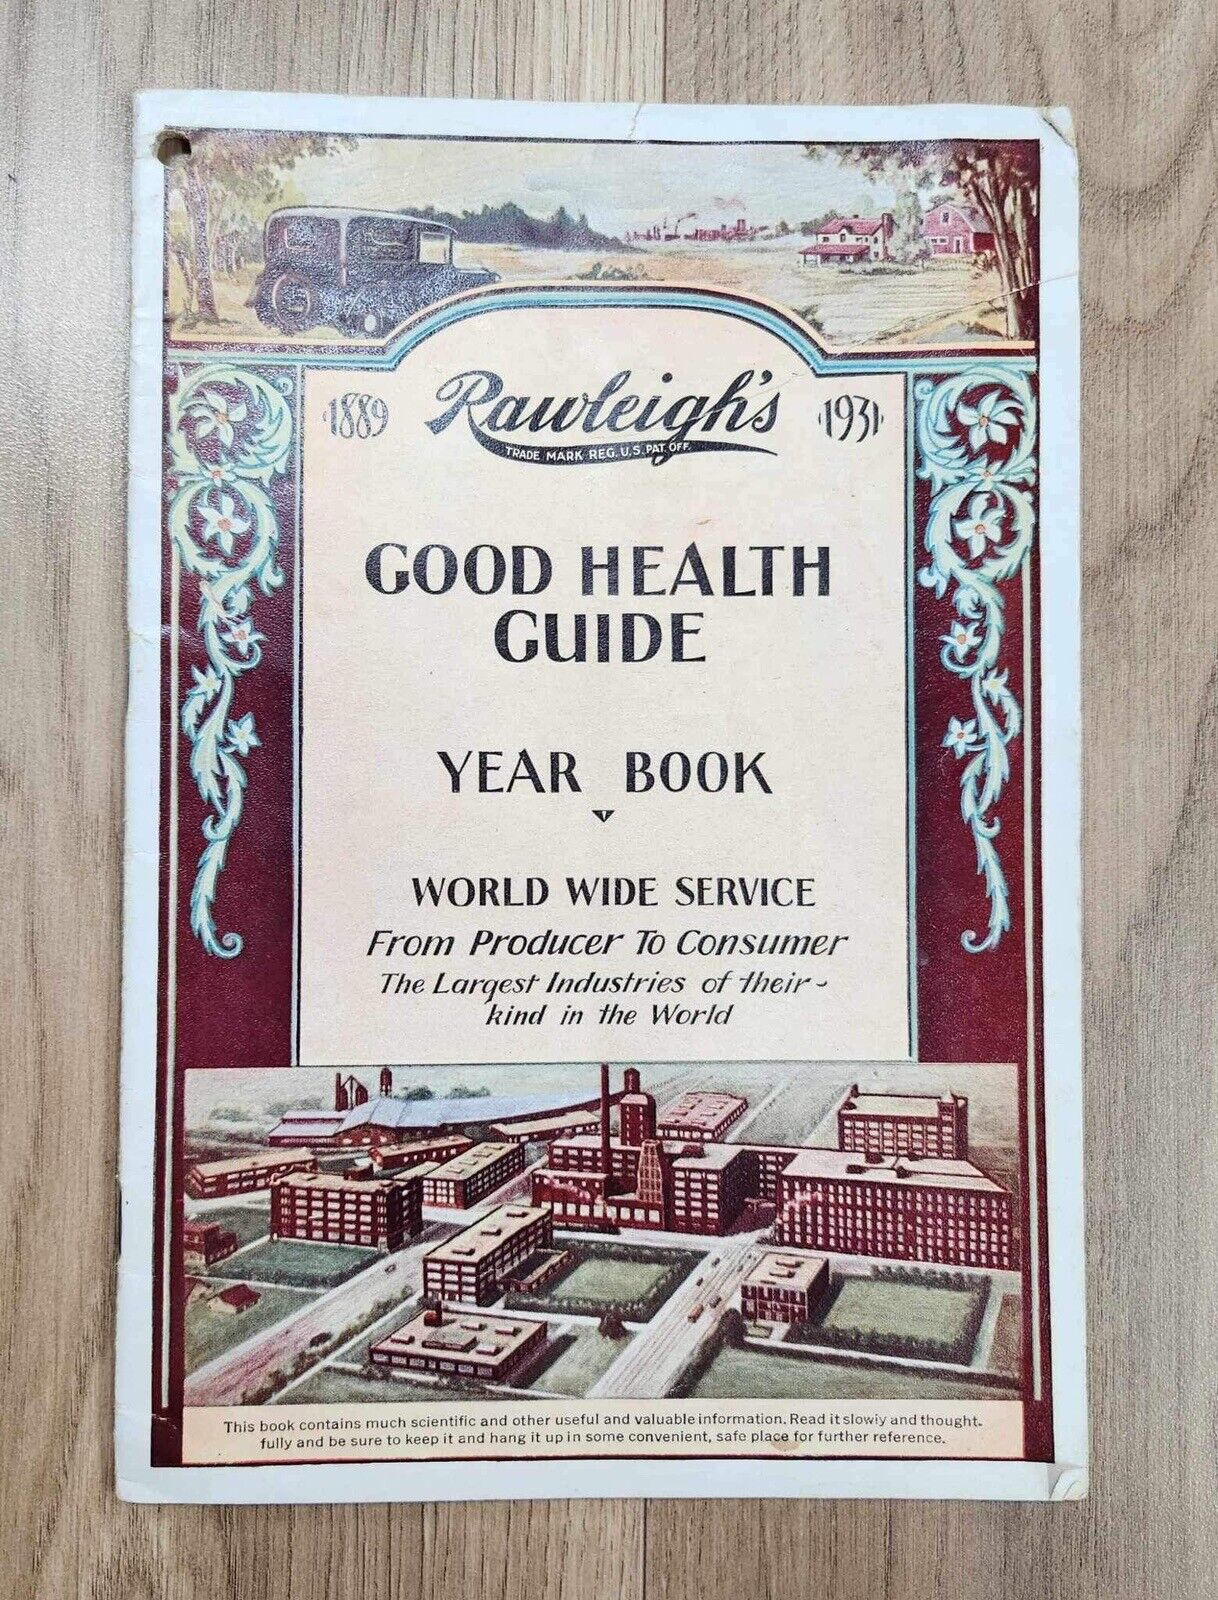 Vintage Raleigh’s 1931 Good Health Guide Year Book 